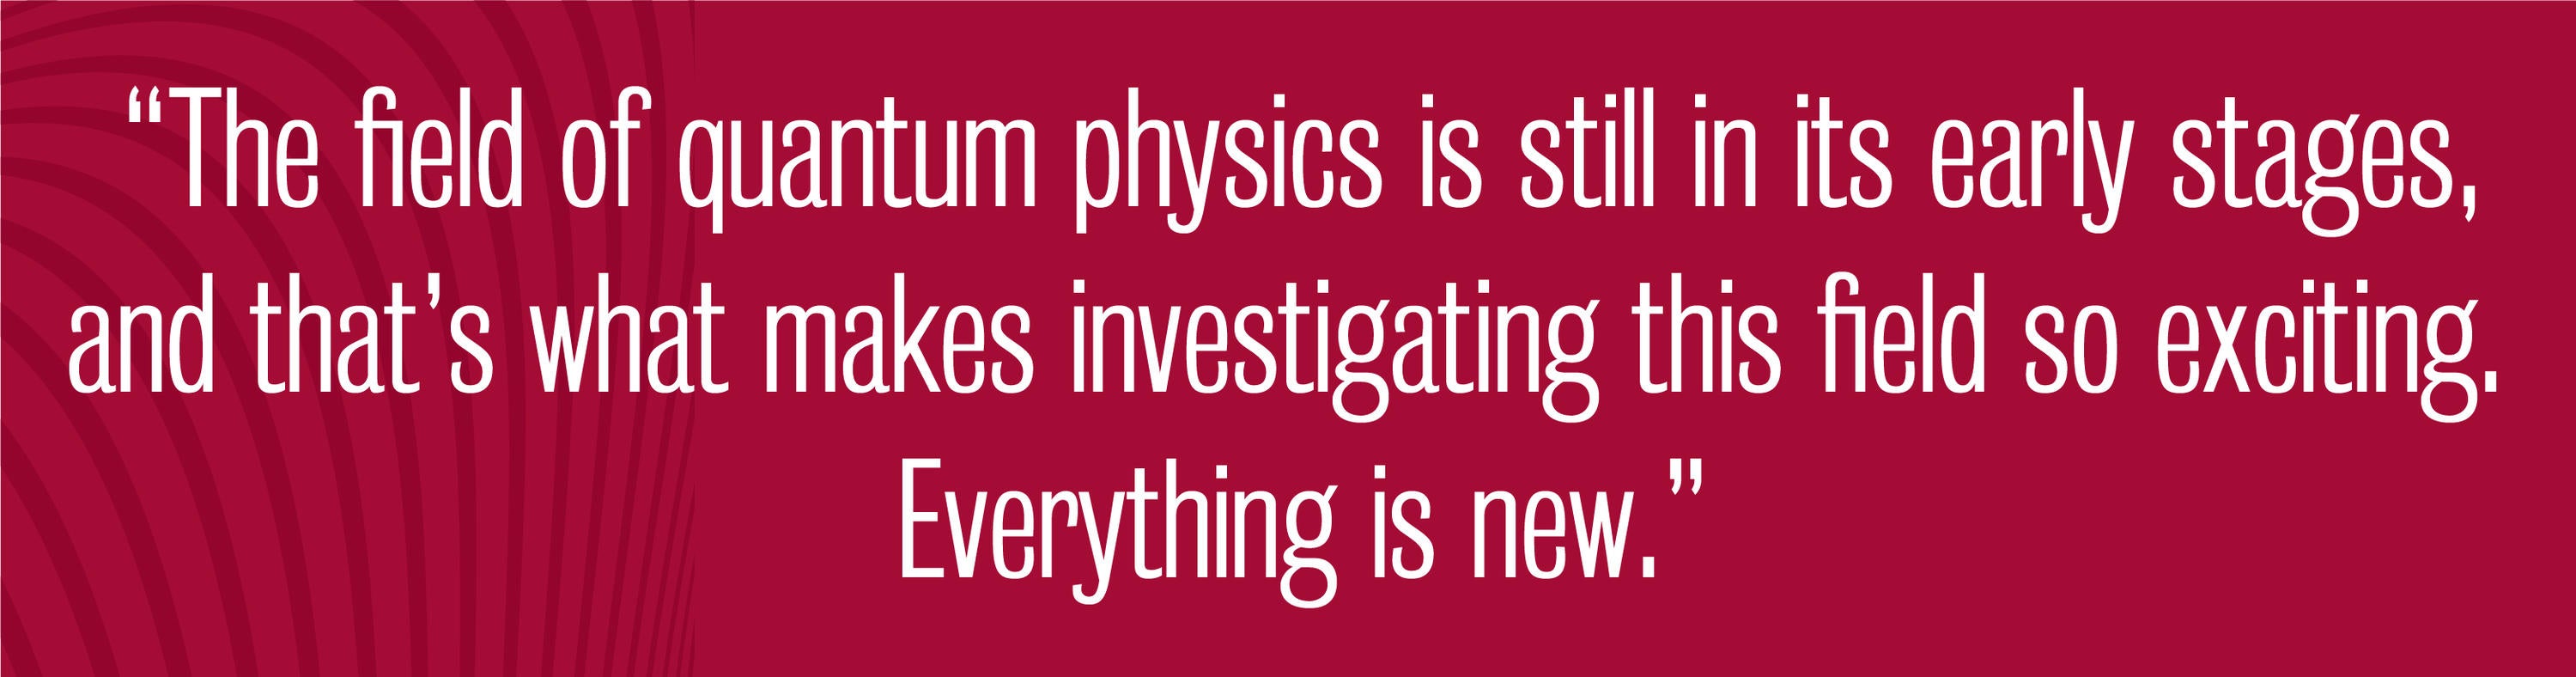 quote - The field of quantum physics is still in its early stages, and that’s what makes investigating this field so exciting. Everything is new